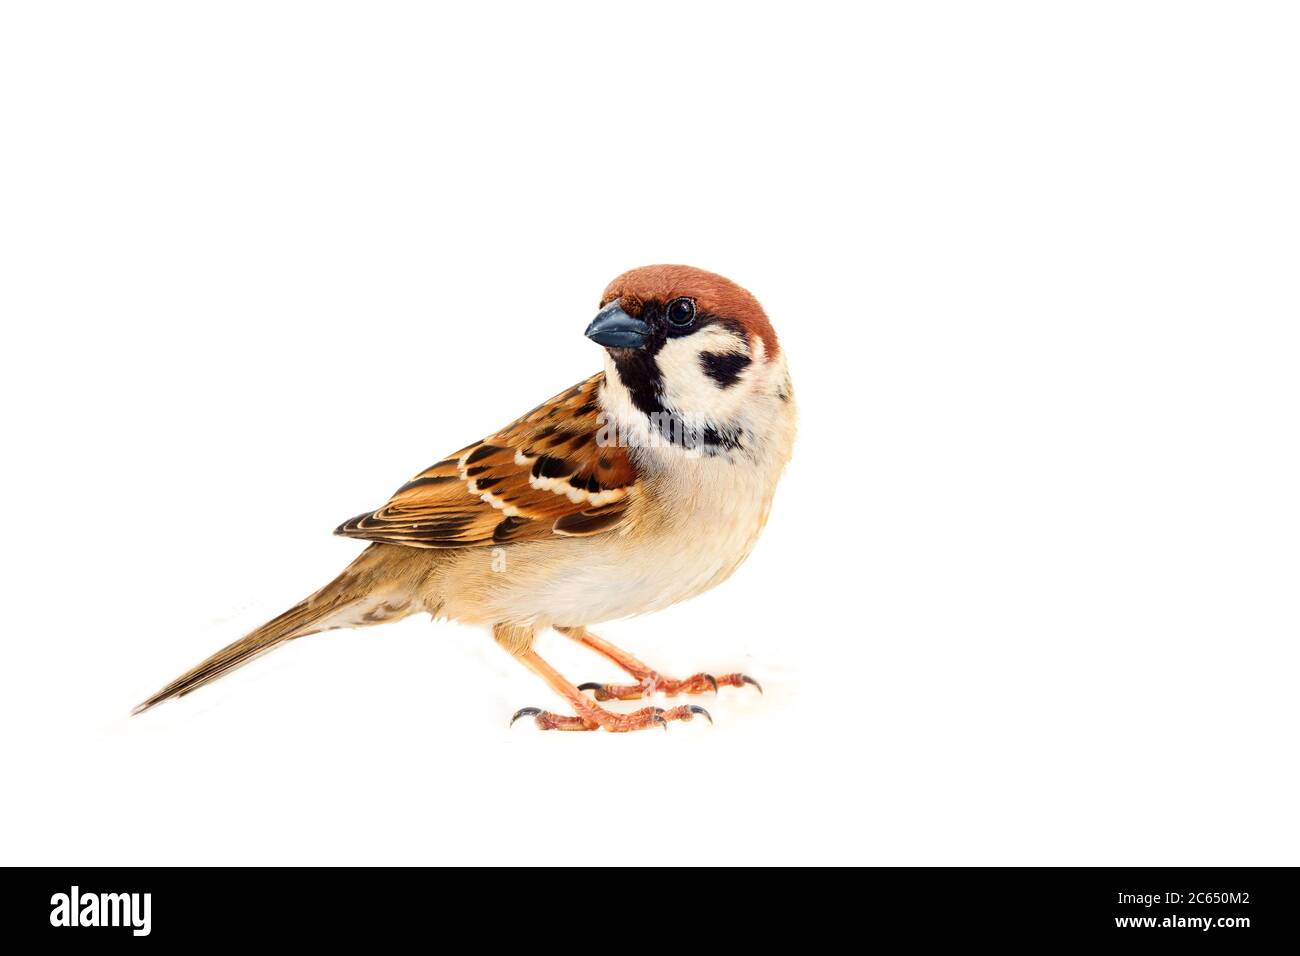 Sparrows as the most common birds in human environment. Eurasian tree sparrow (Passer montanus) in dynamics isolated on white background Stock Photo